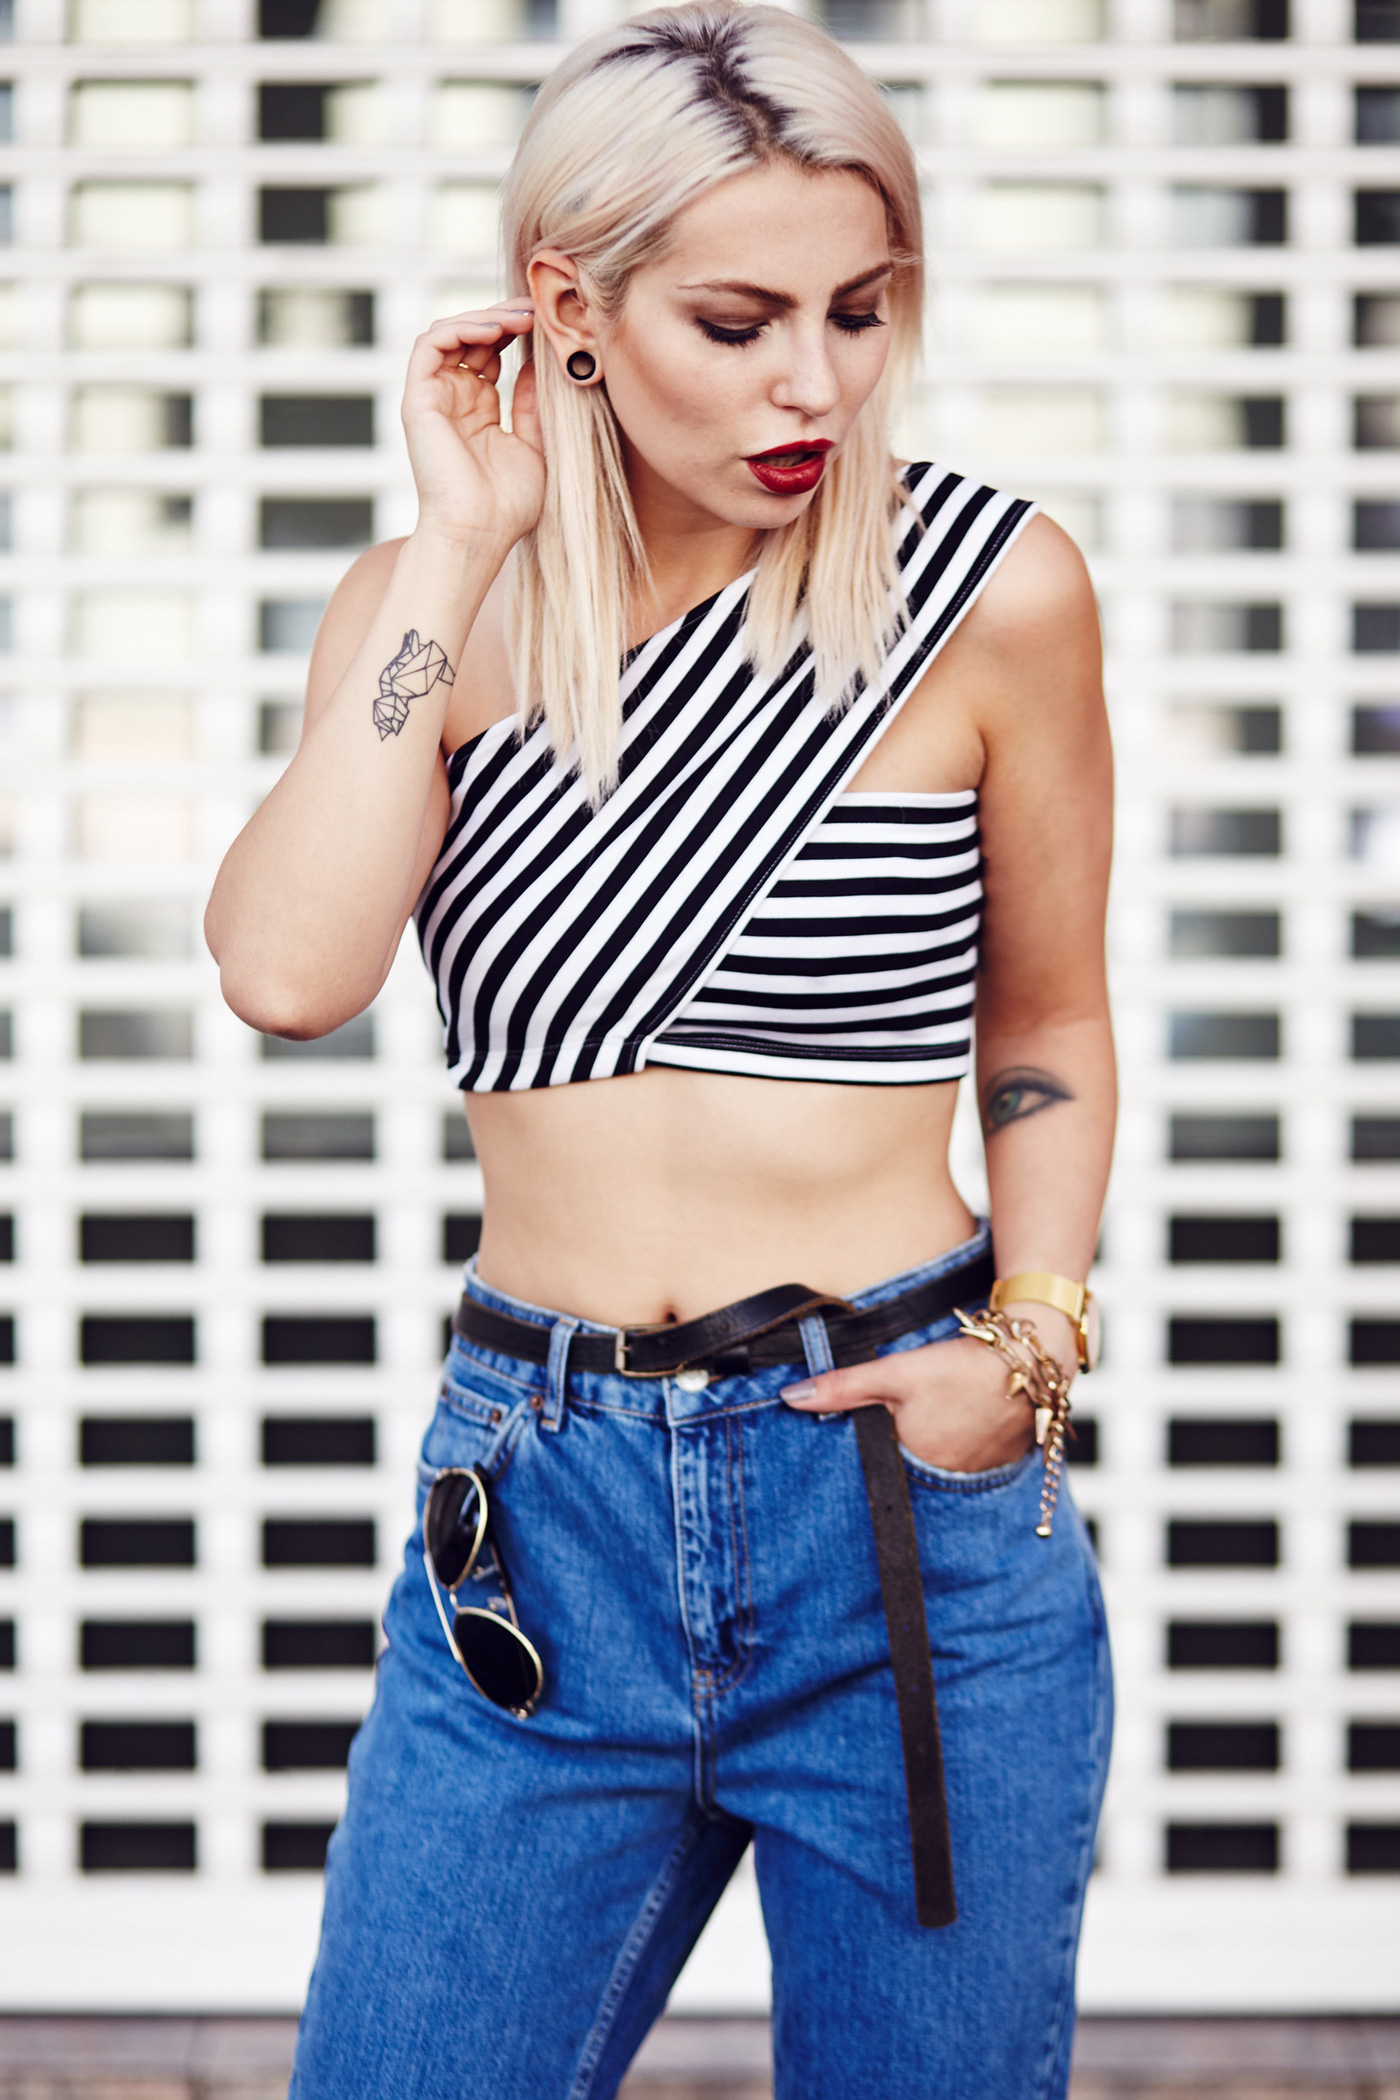 summer street style from Berlin | wearing a striped crop top and Mom Jeans | via Masha Sedgwick